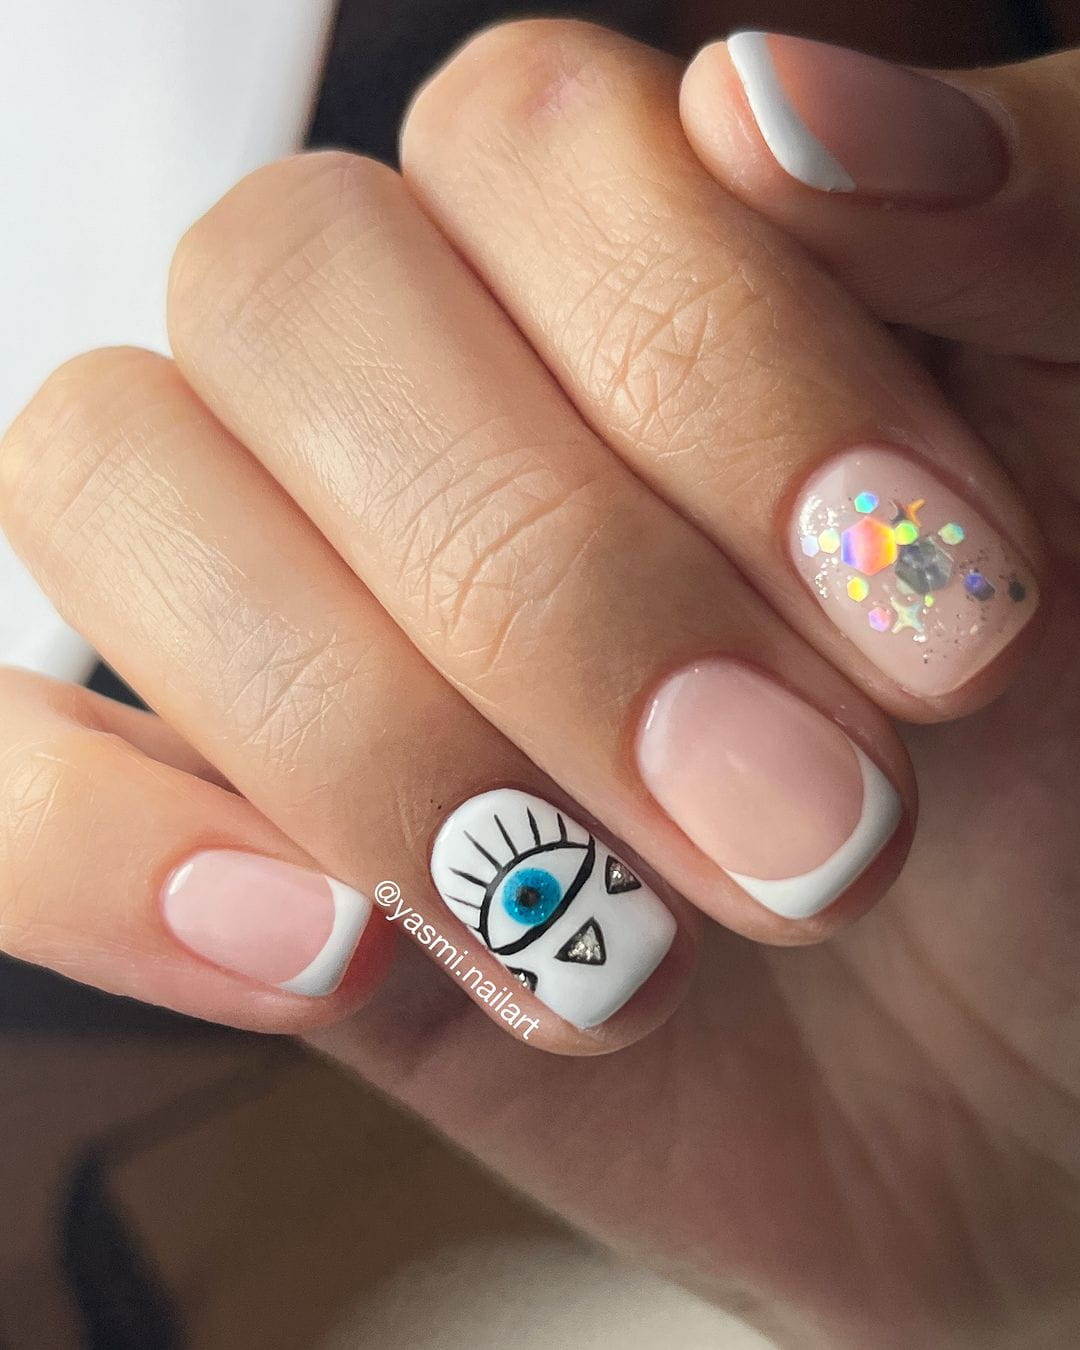 100 Pretty Spring Nail Designs To Try This Year images 65